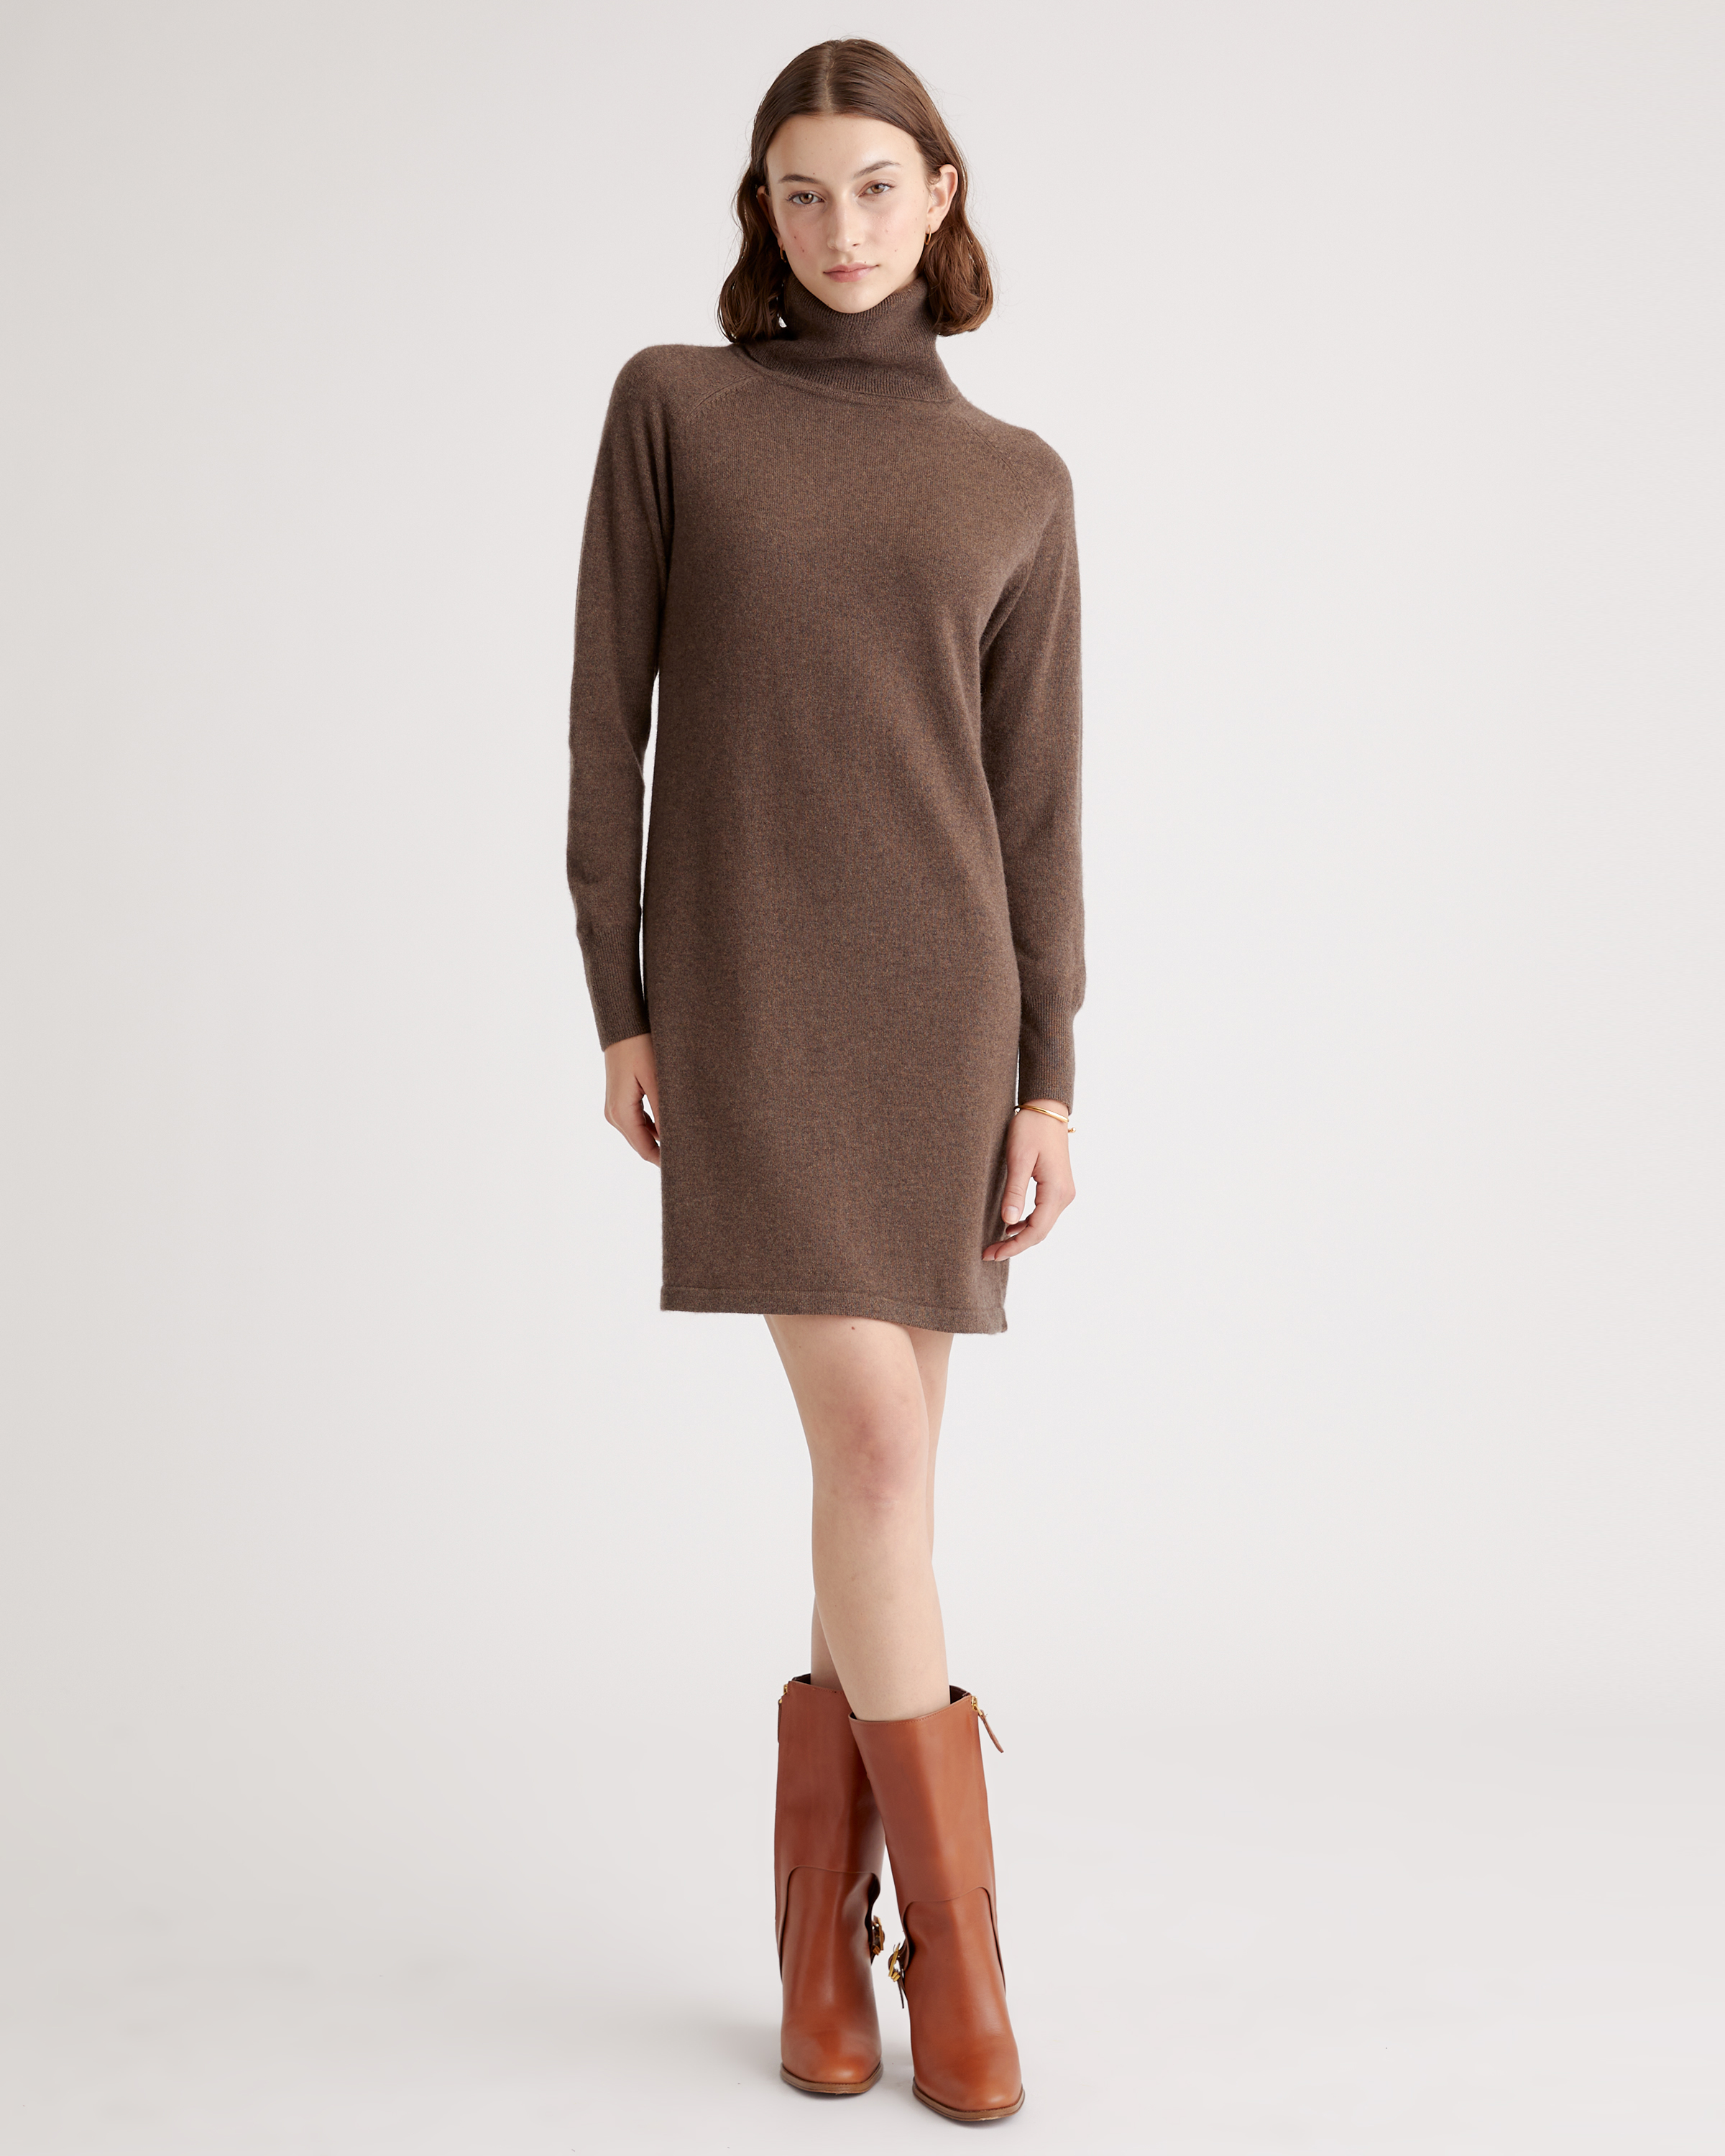 Women's luxurious cashmere outfits